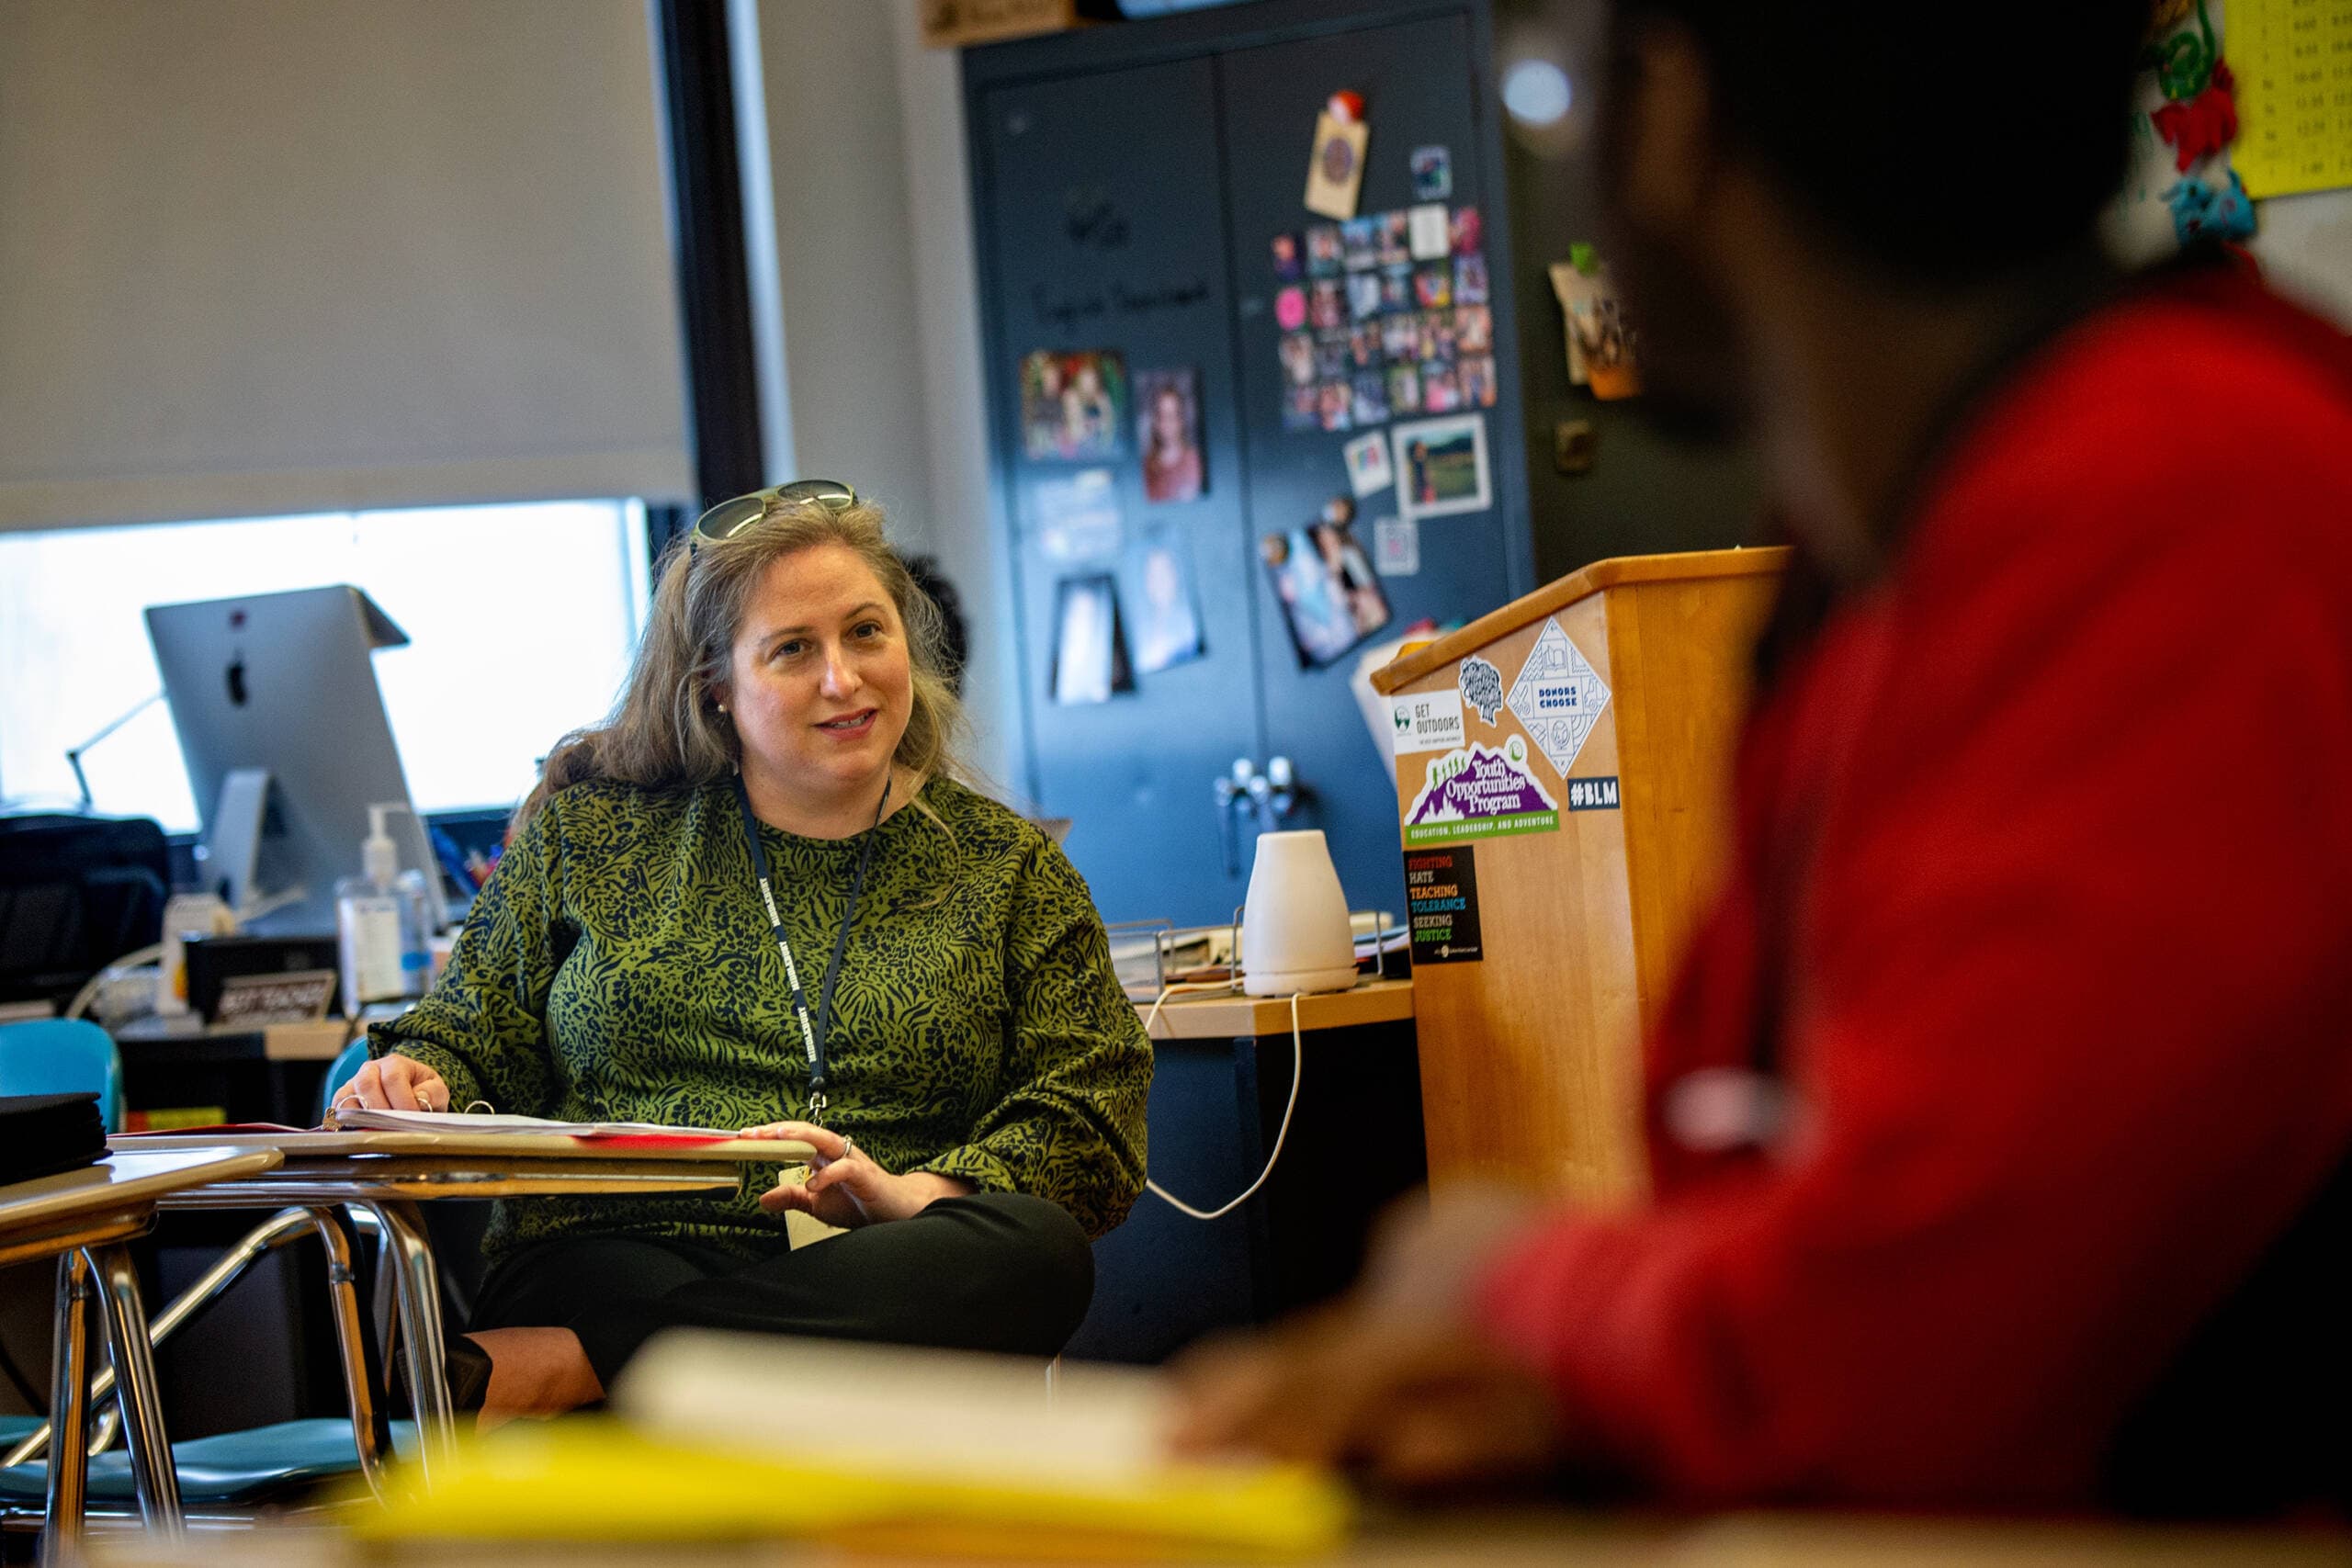 Teacher Kendra Bauer conducts one of her college level English classes at Lowell High School. (Jesse Costa/WBUR)